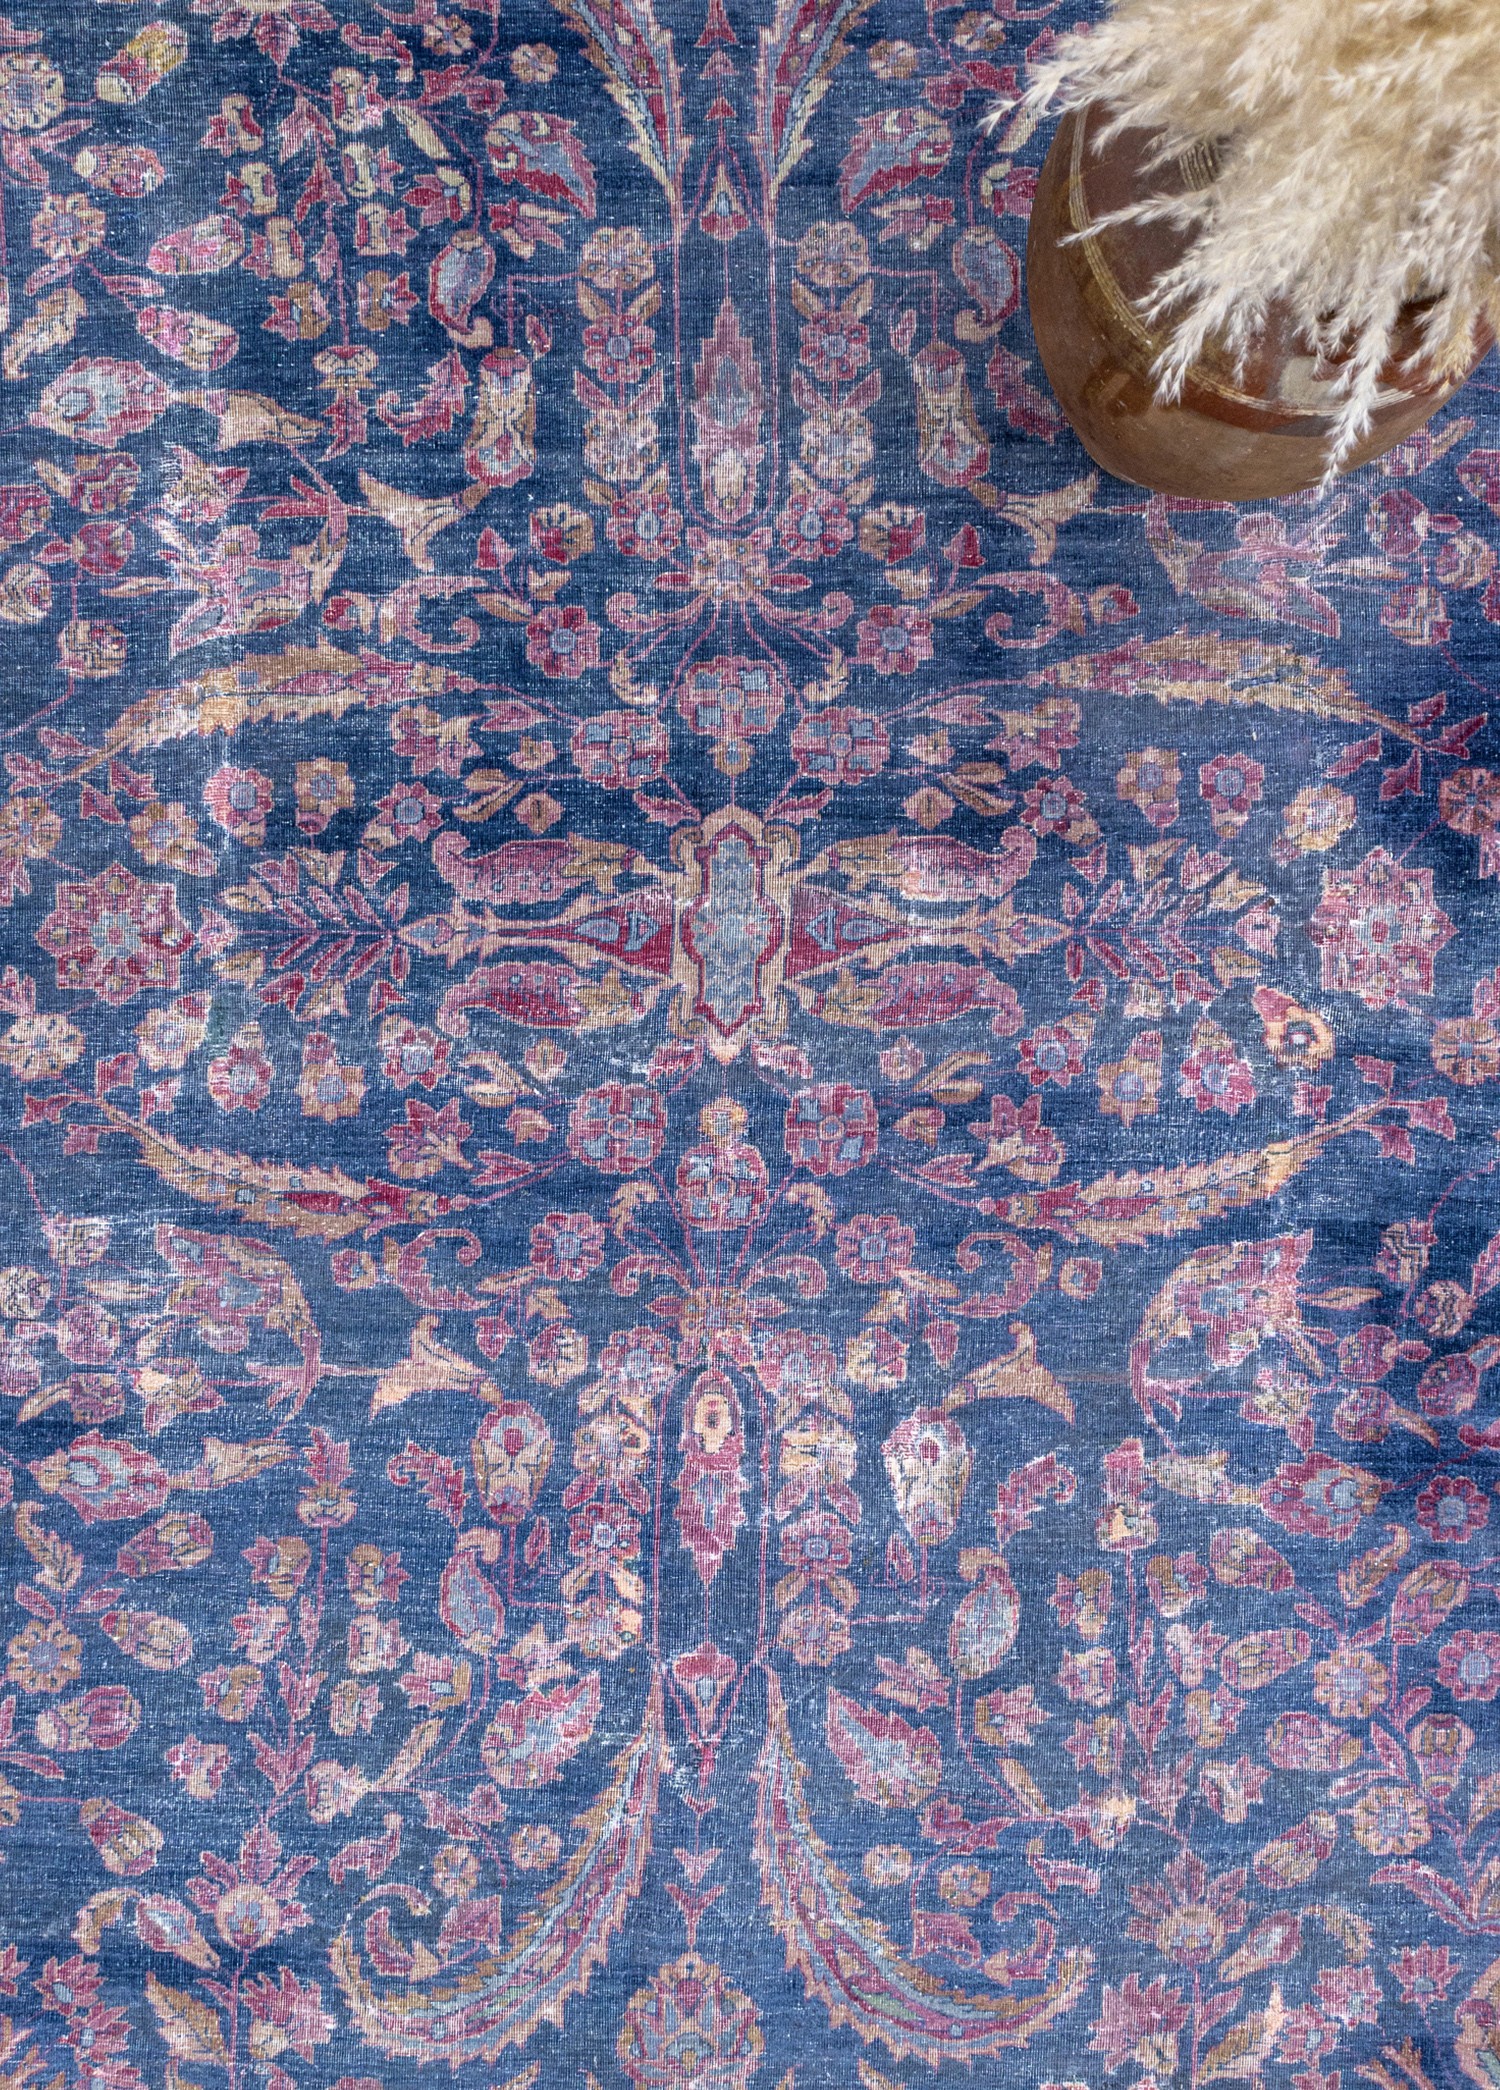 Why Is Persian Rug Special and Irreplaceable?